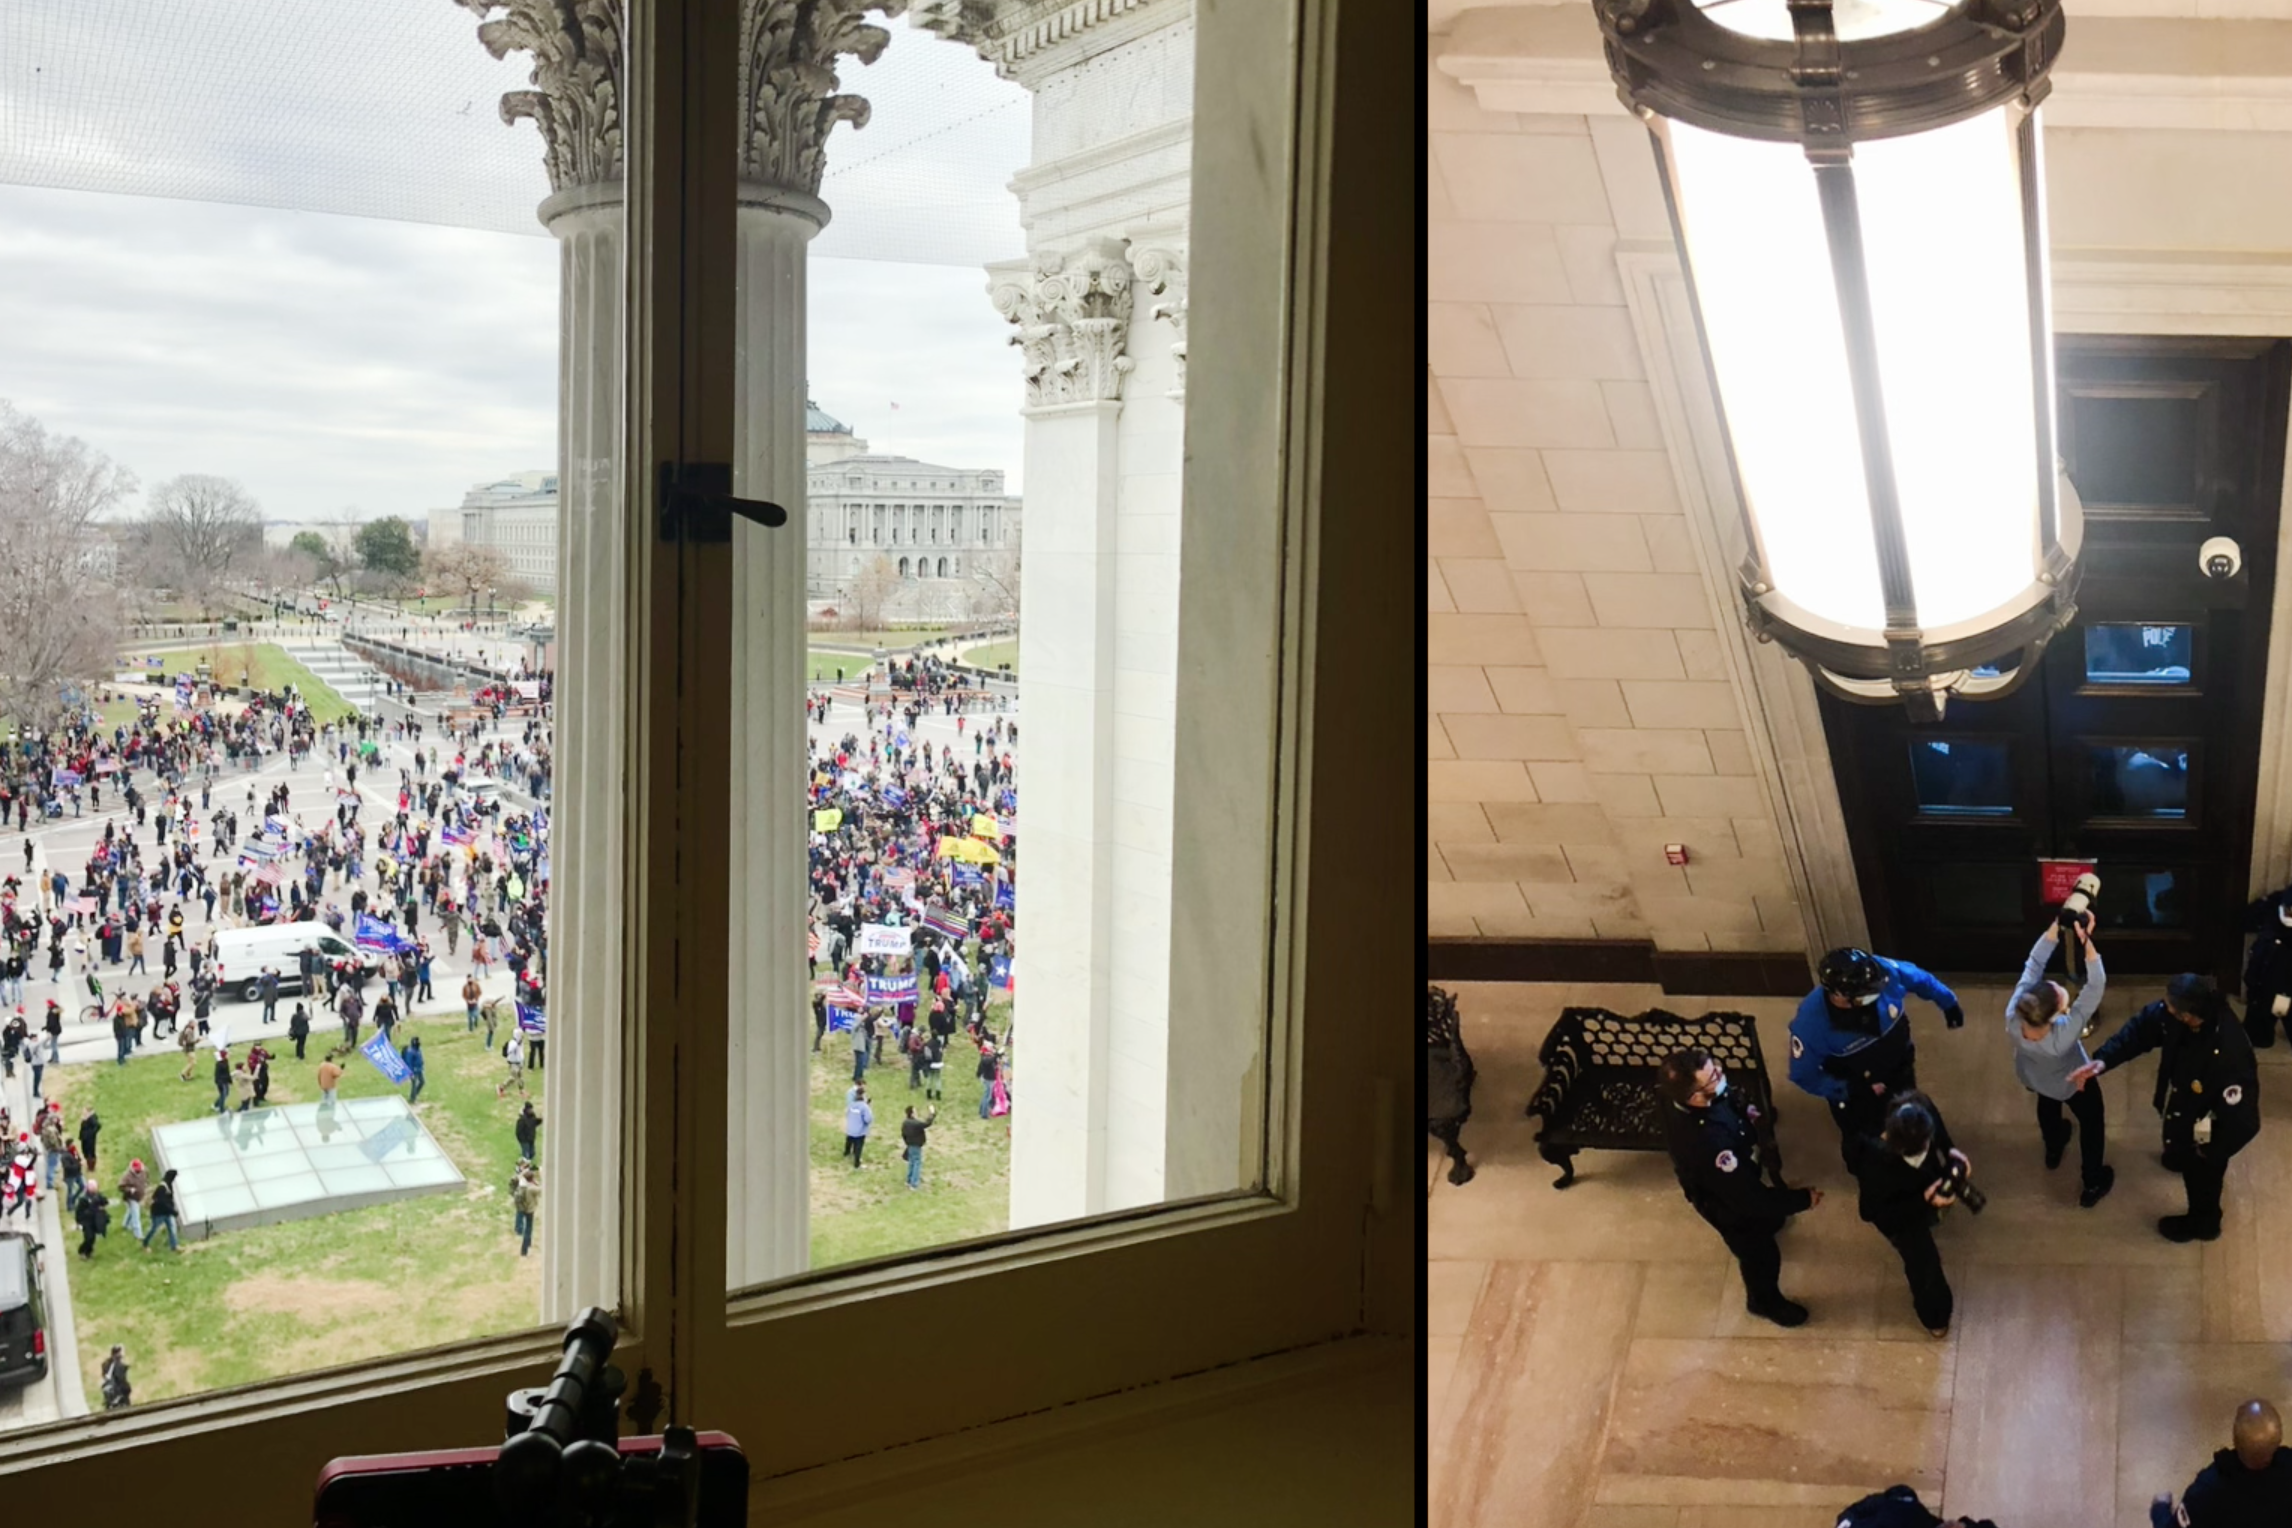 Photos of rioters inside and outside the Capitol on Jan. 6